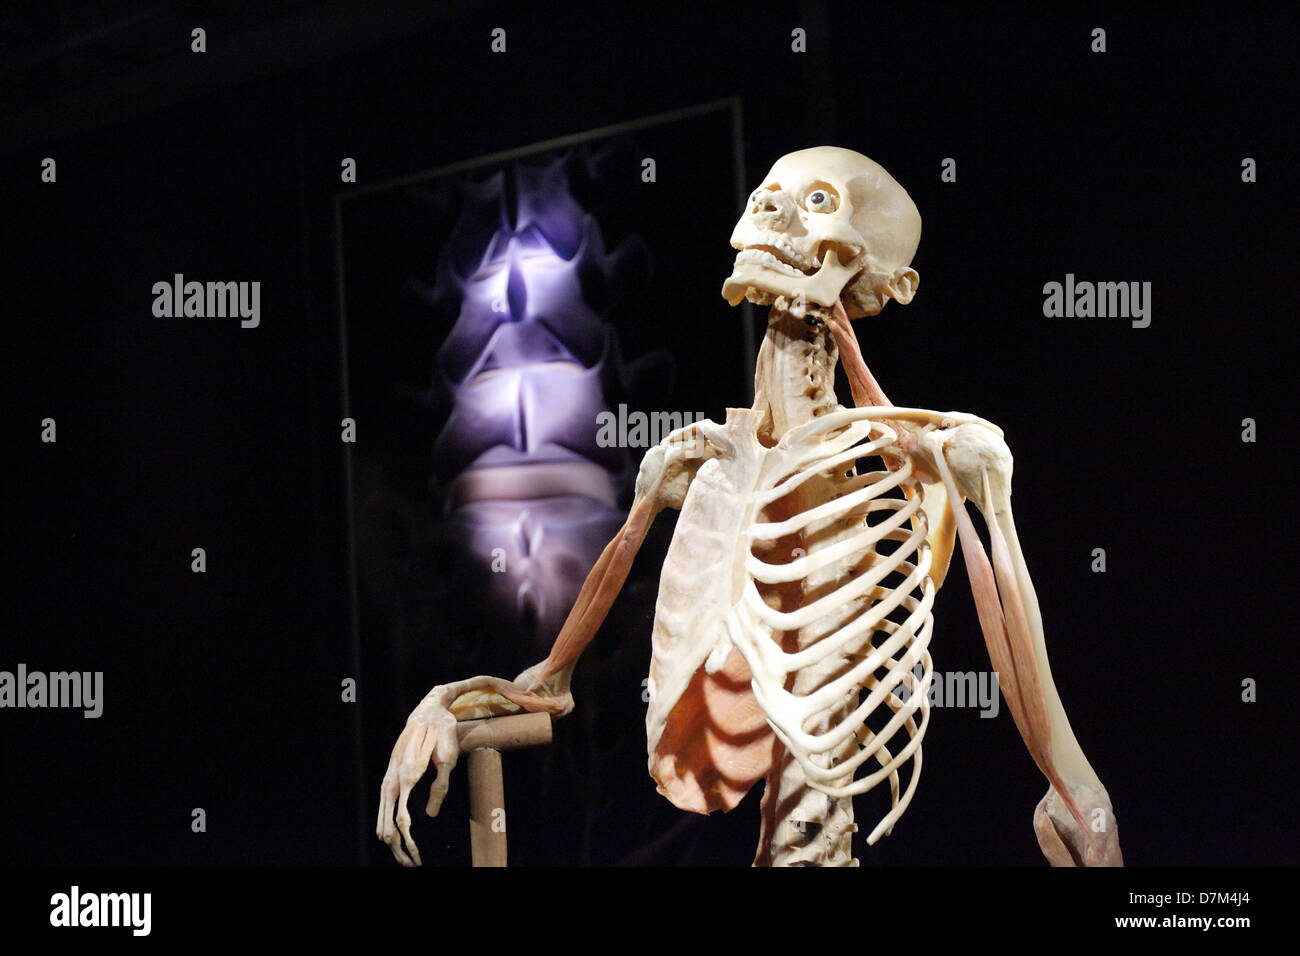 Gdansk, Poland. 10th, May 2013 The Human Body Exhibition in Gdansk. The Human Body Exhibition features the entire anatomy of real human bodies, dissected and preserved to showcase each system of the body. Credit: Michal Fludra/Alamy Live News Stock Photo